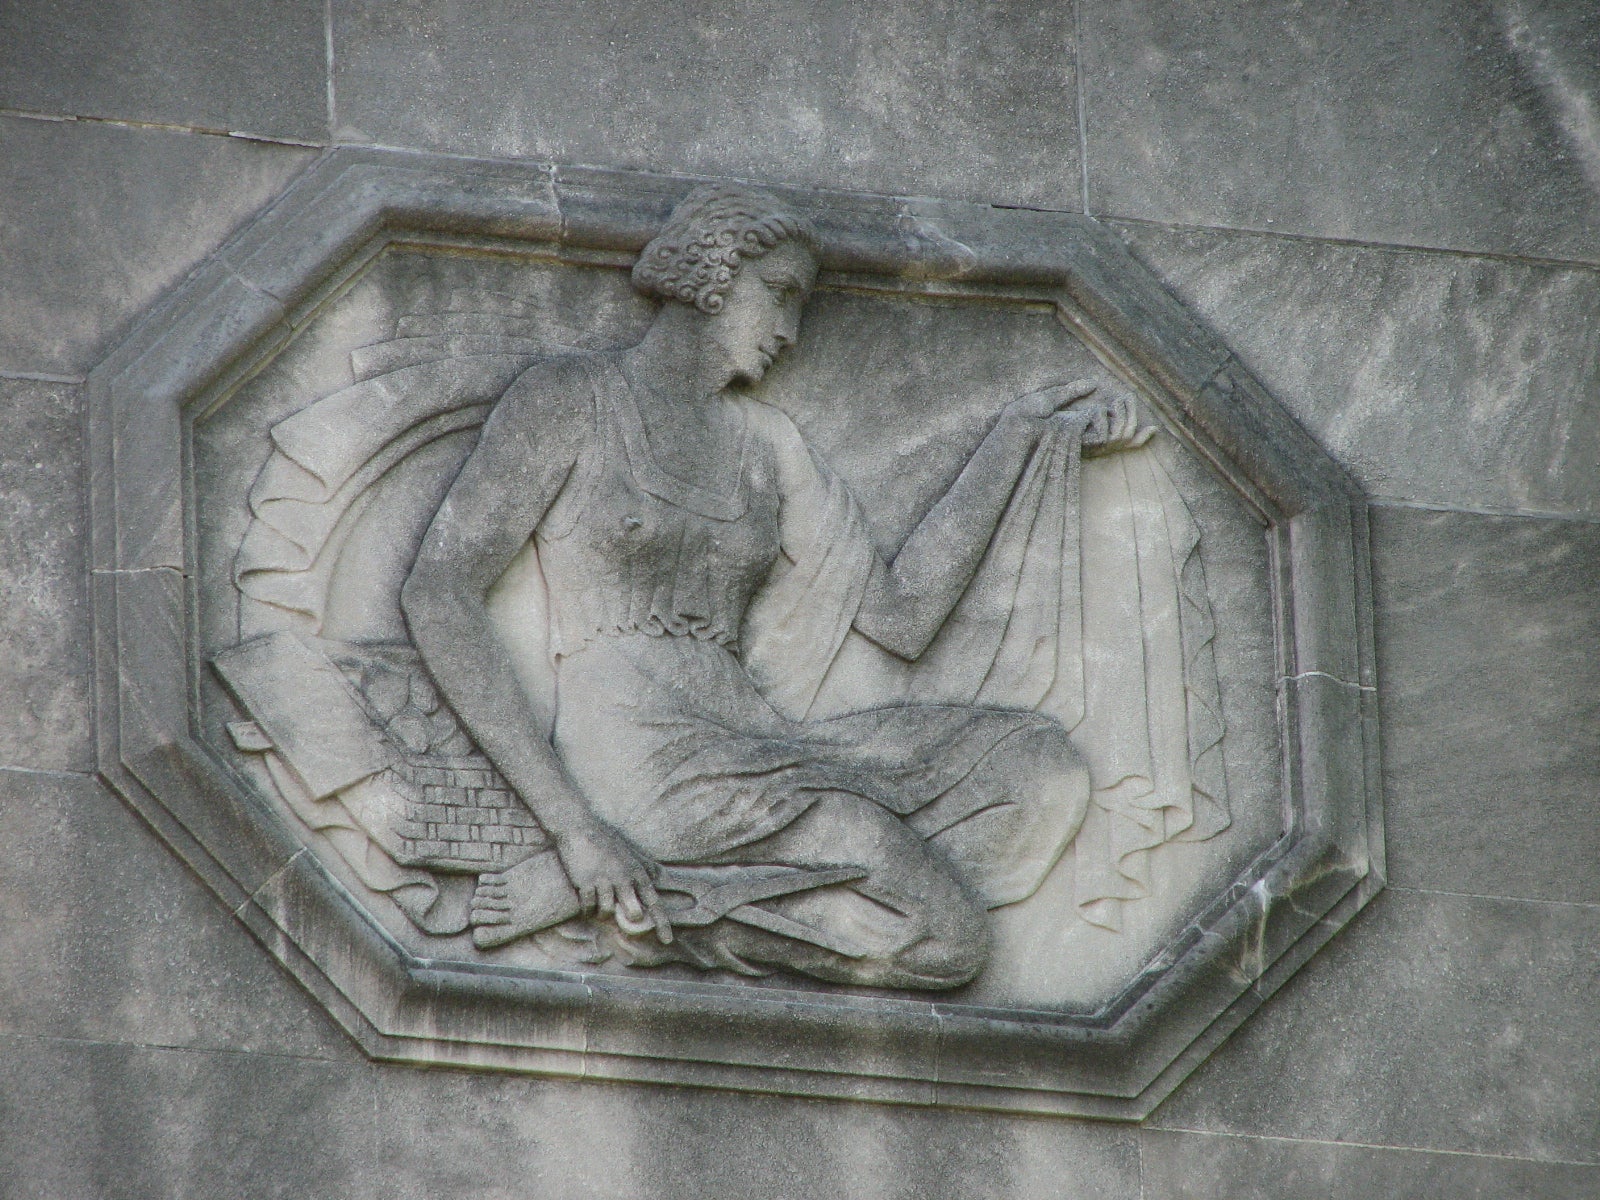 Deco carvings adorn the front section of Dobbins on Lehigh Avenue.